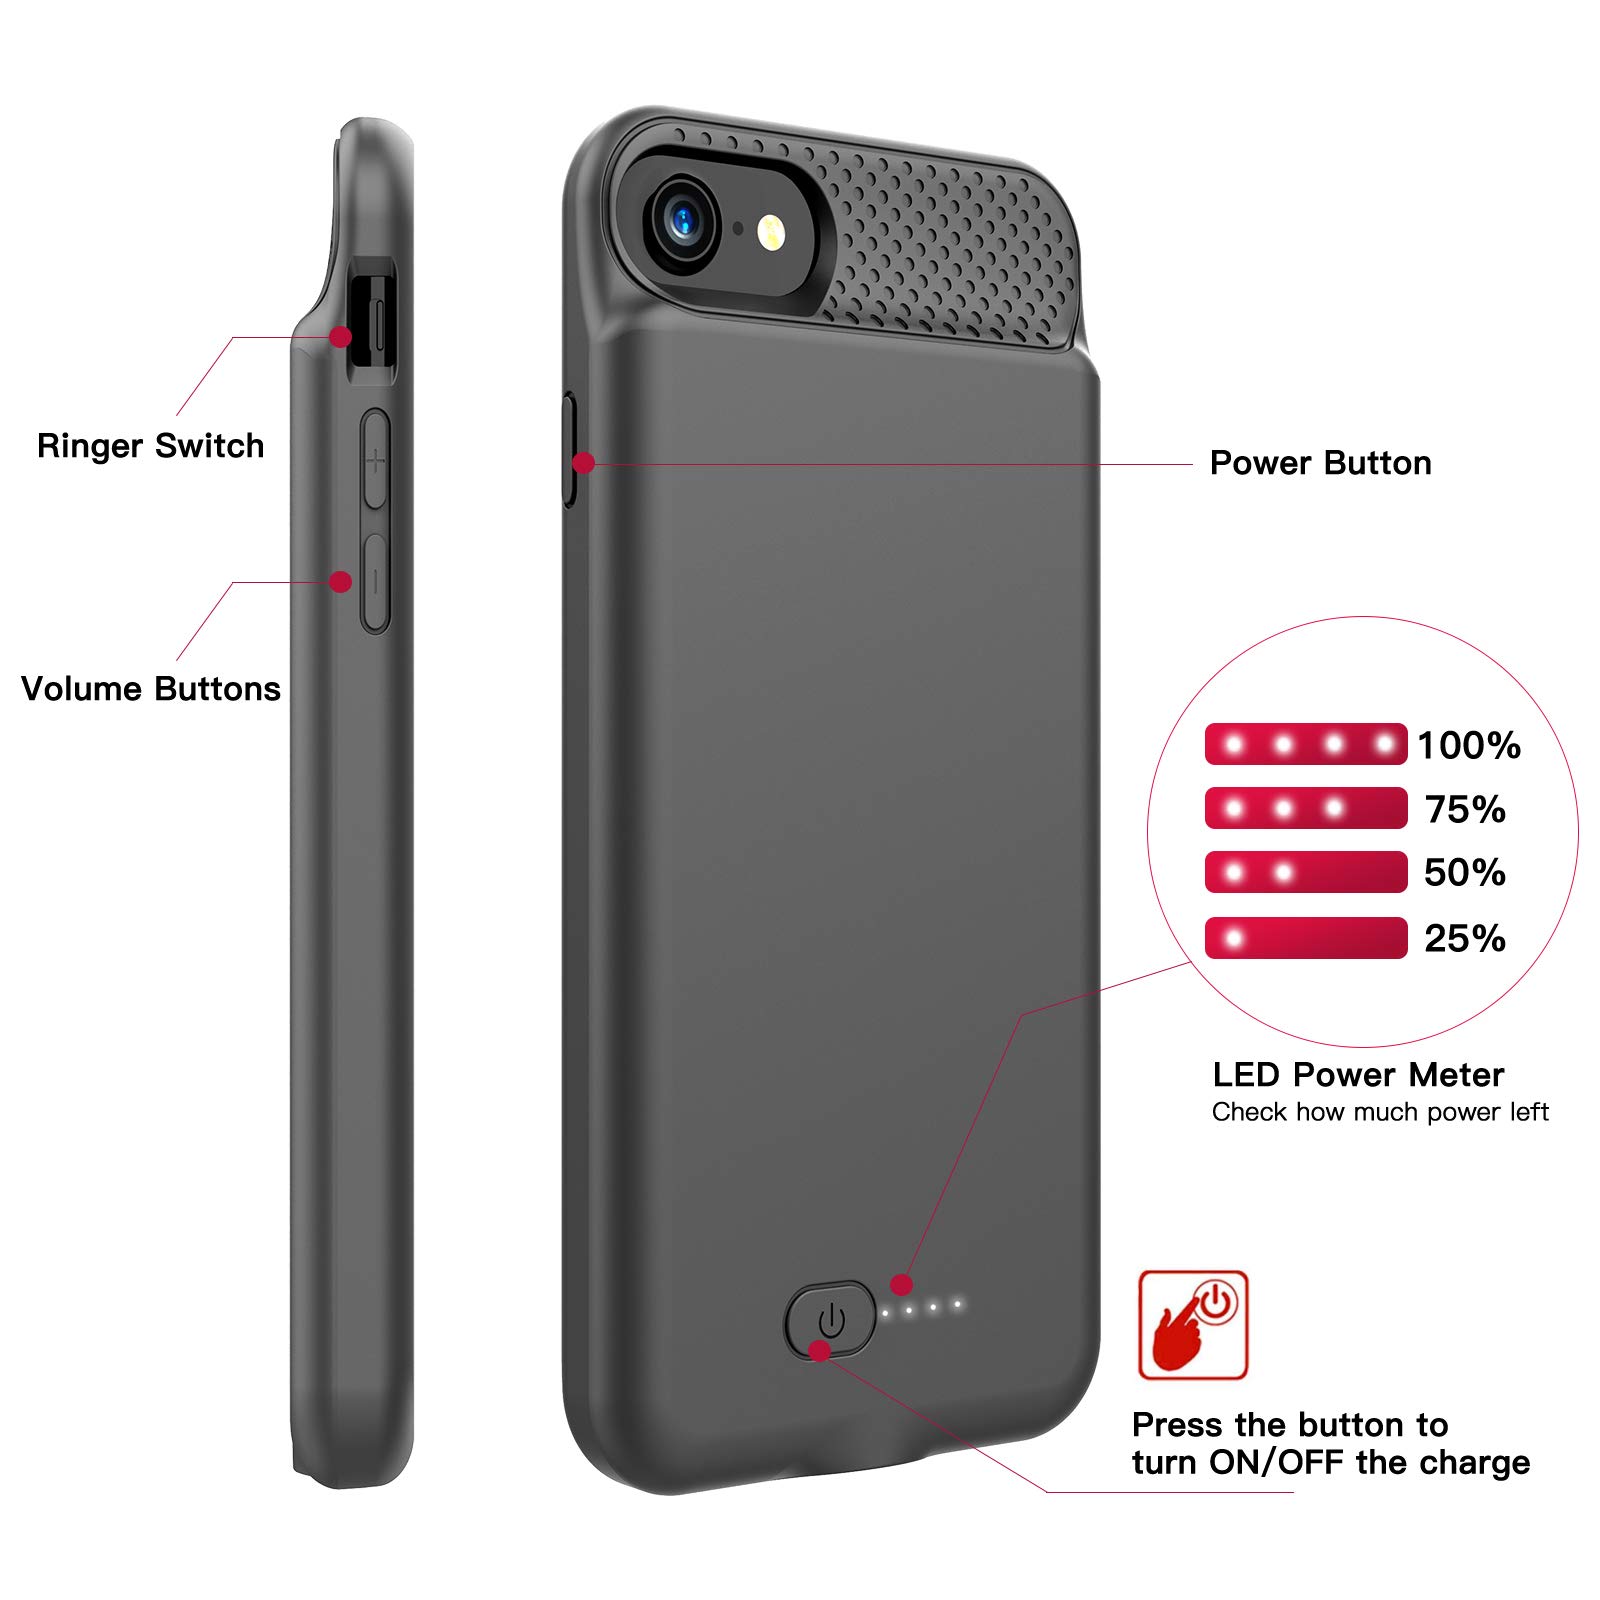 BOPPS Battery Case for iPhone 8/7/6s/6/SE(2022/2020), Powerful 6000mAh Ultra Slim iPhone Charging Case 360°Protection Rechargeable Extended Battery Charger Case for iPhone 8/7/6s/6/SE(3rd and 2nd Gen)